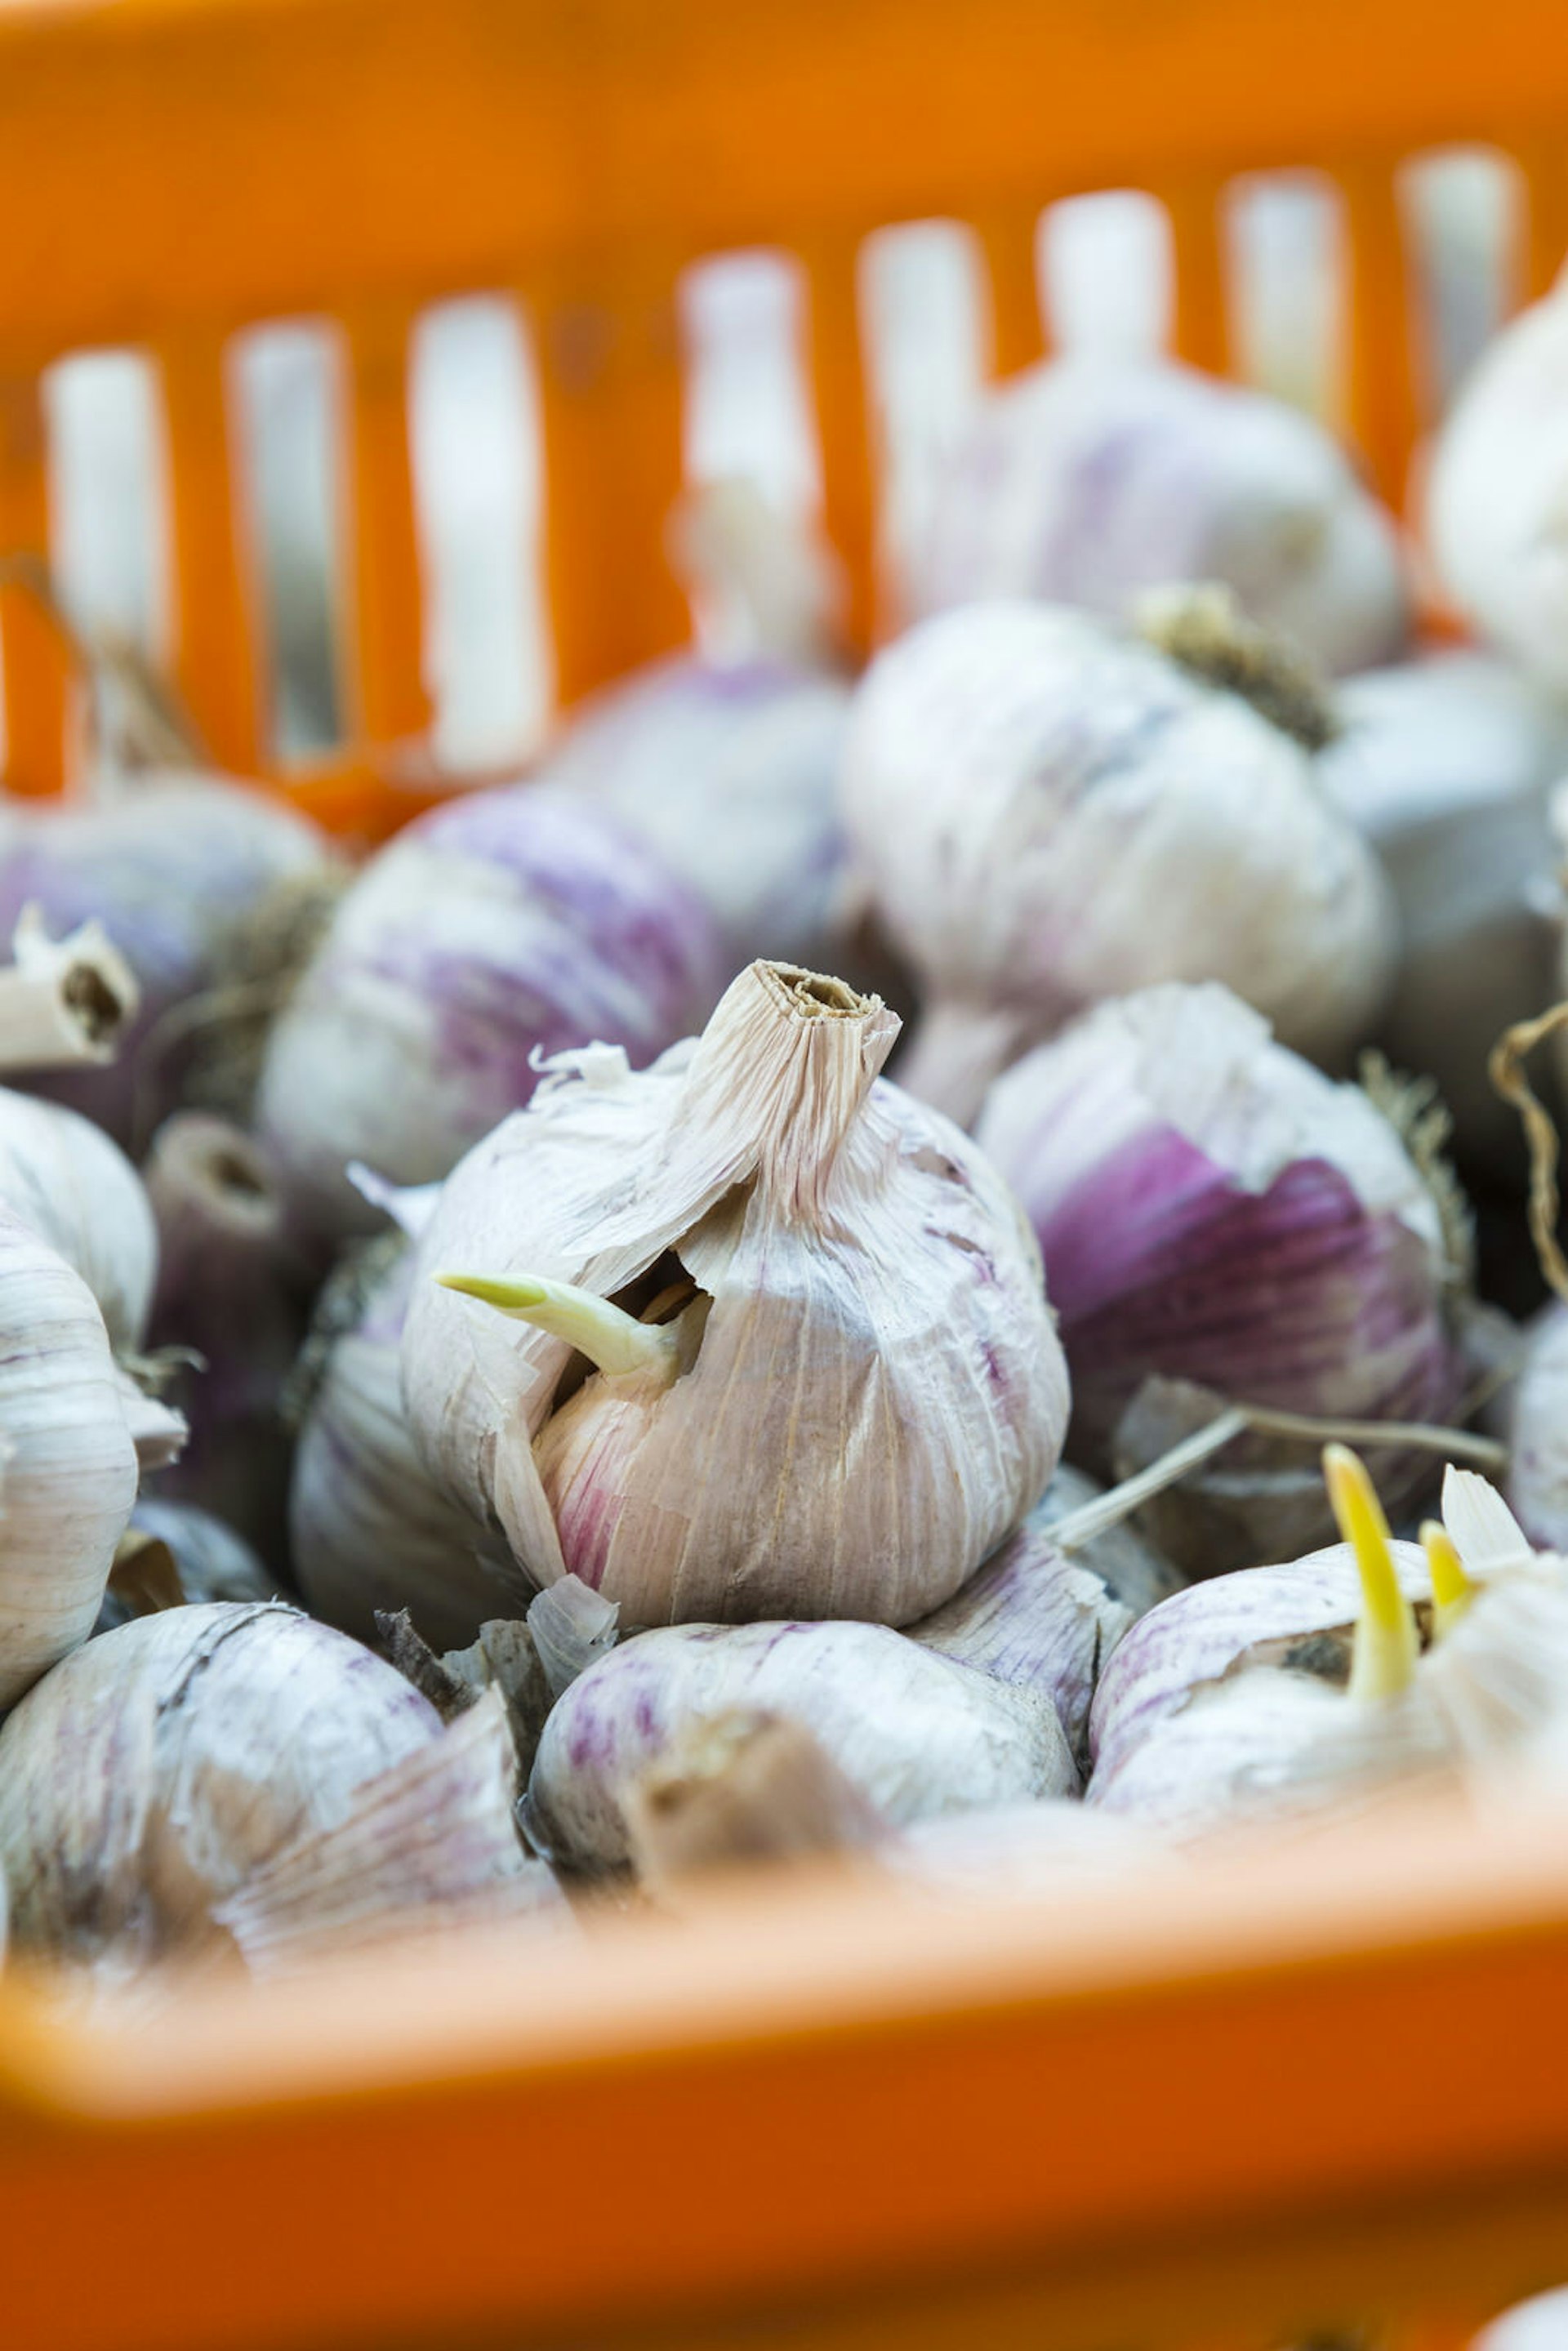 A close up shot of organic garlic at Margaret River Farmers Market © Catherine Sutherland/Lonely Planet